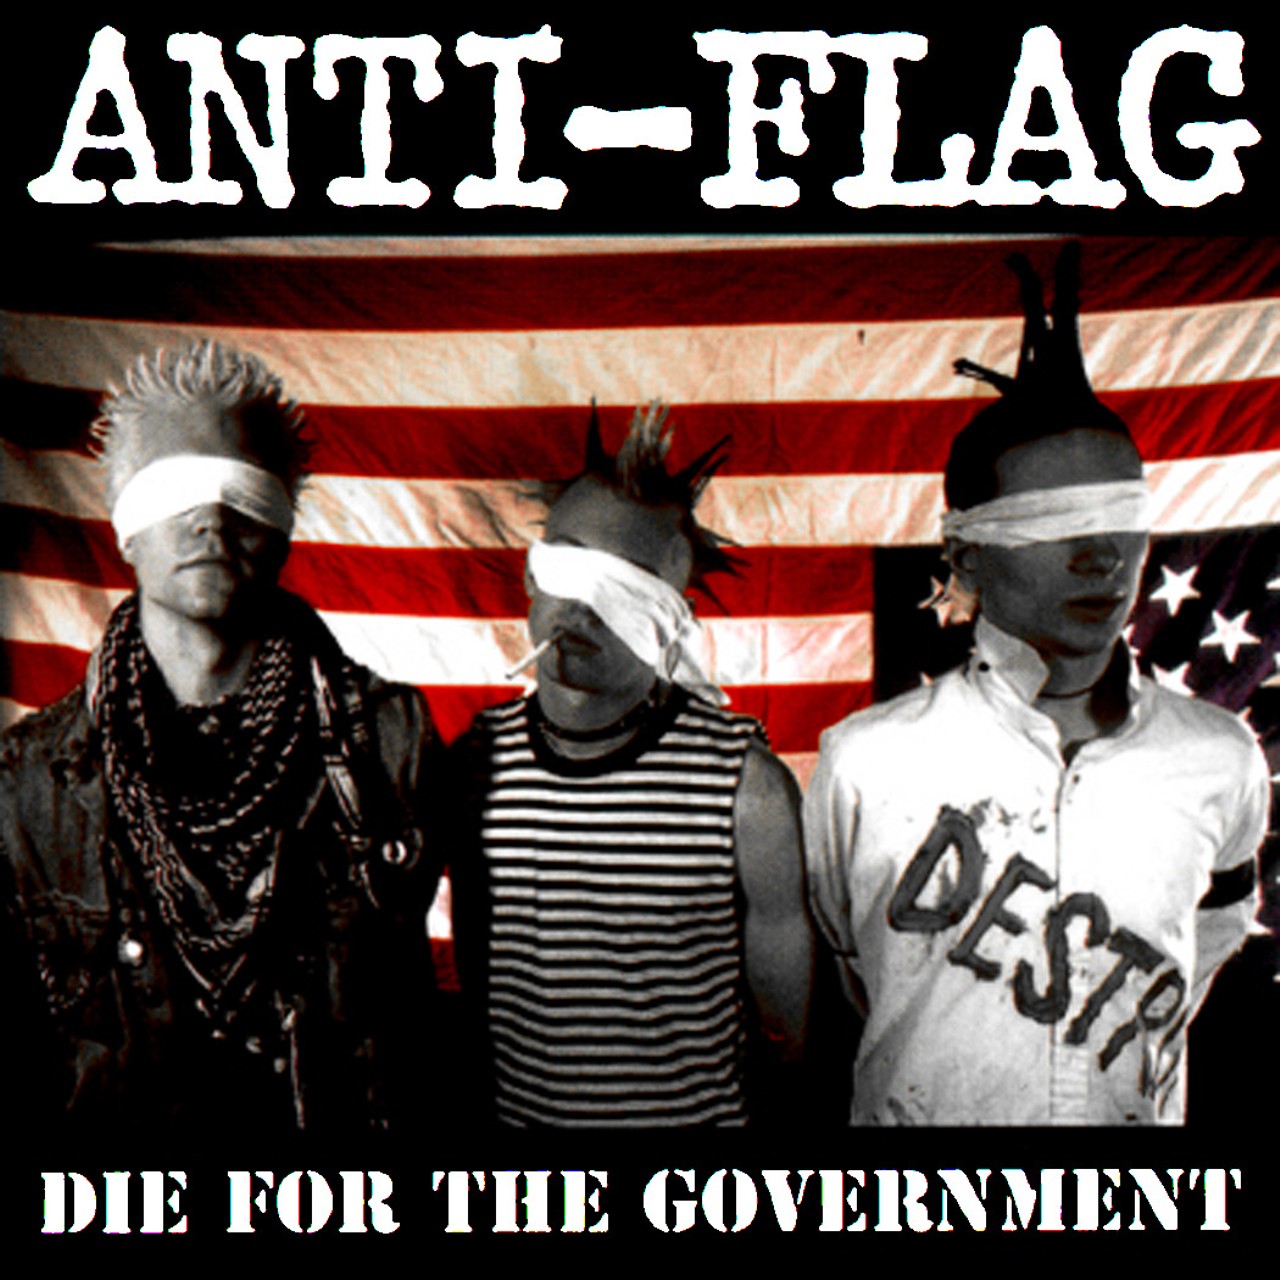 Anti-Flag - Die for the Government (1996)
The first and, ahem, the best record by Pennsylvania punk band Anti-Flag, Die for the Government has the upside-down American flag (a common theme on this list) behind the band members. Anti-Flag went on to distance itself from the overtly-anti-American theme of this record. Always sad to see a band move from its roots to accommodate a larger audience.